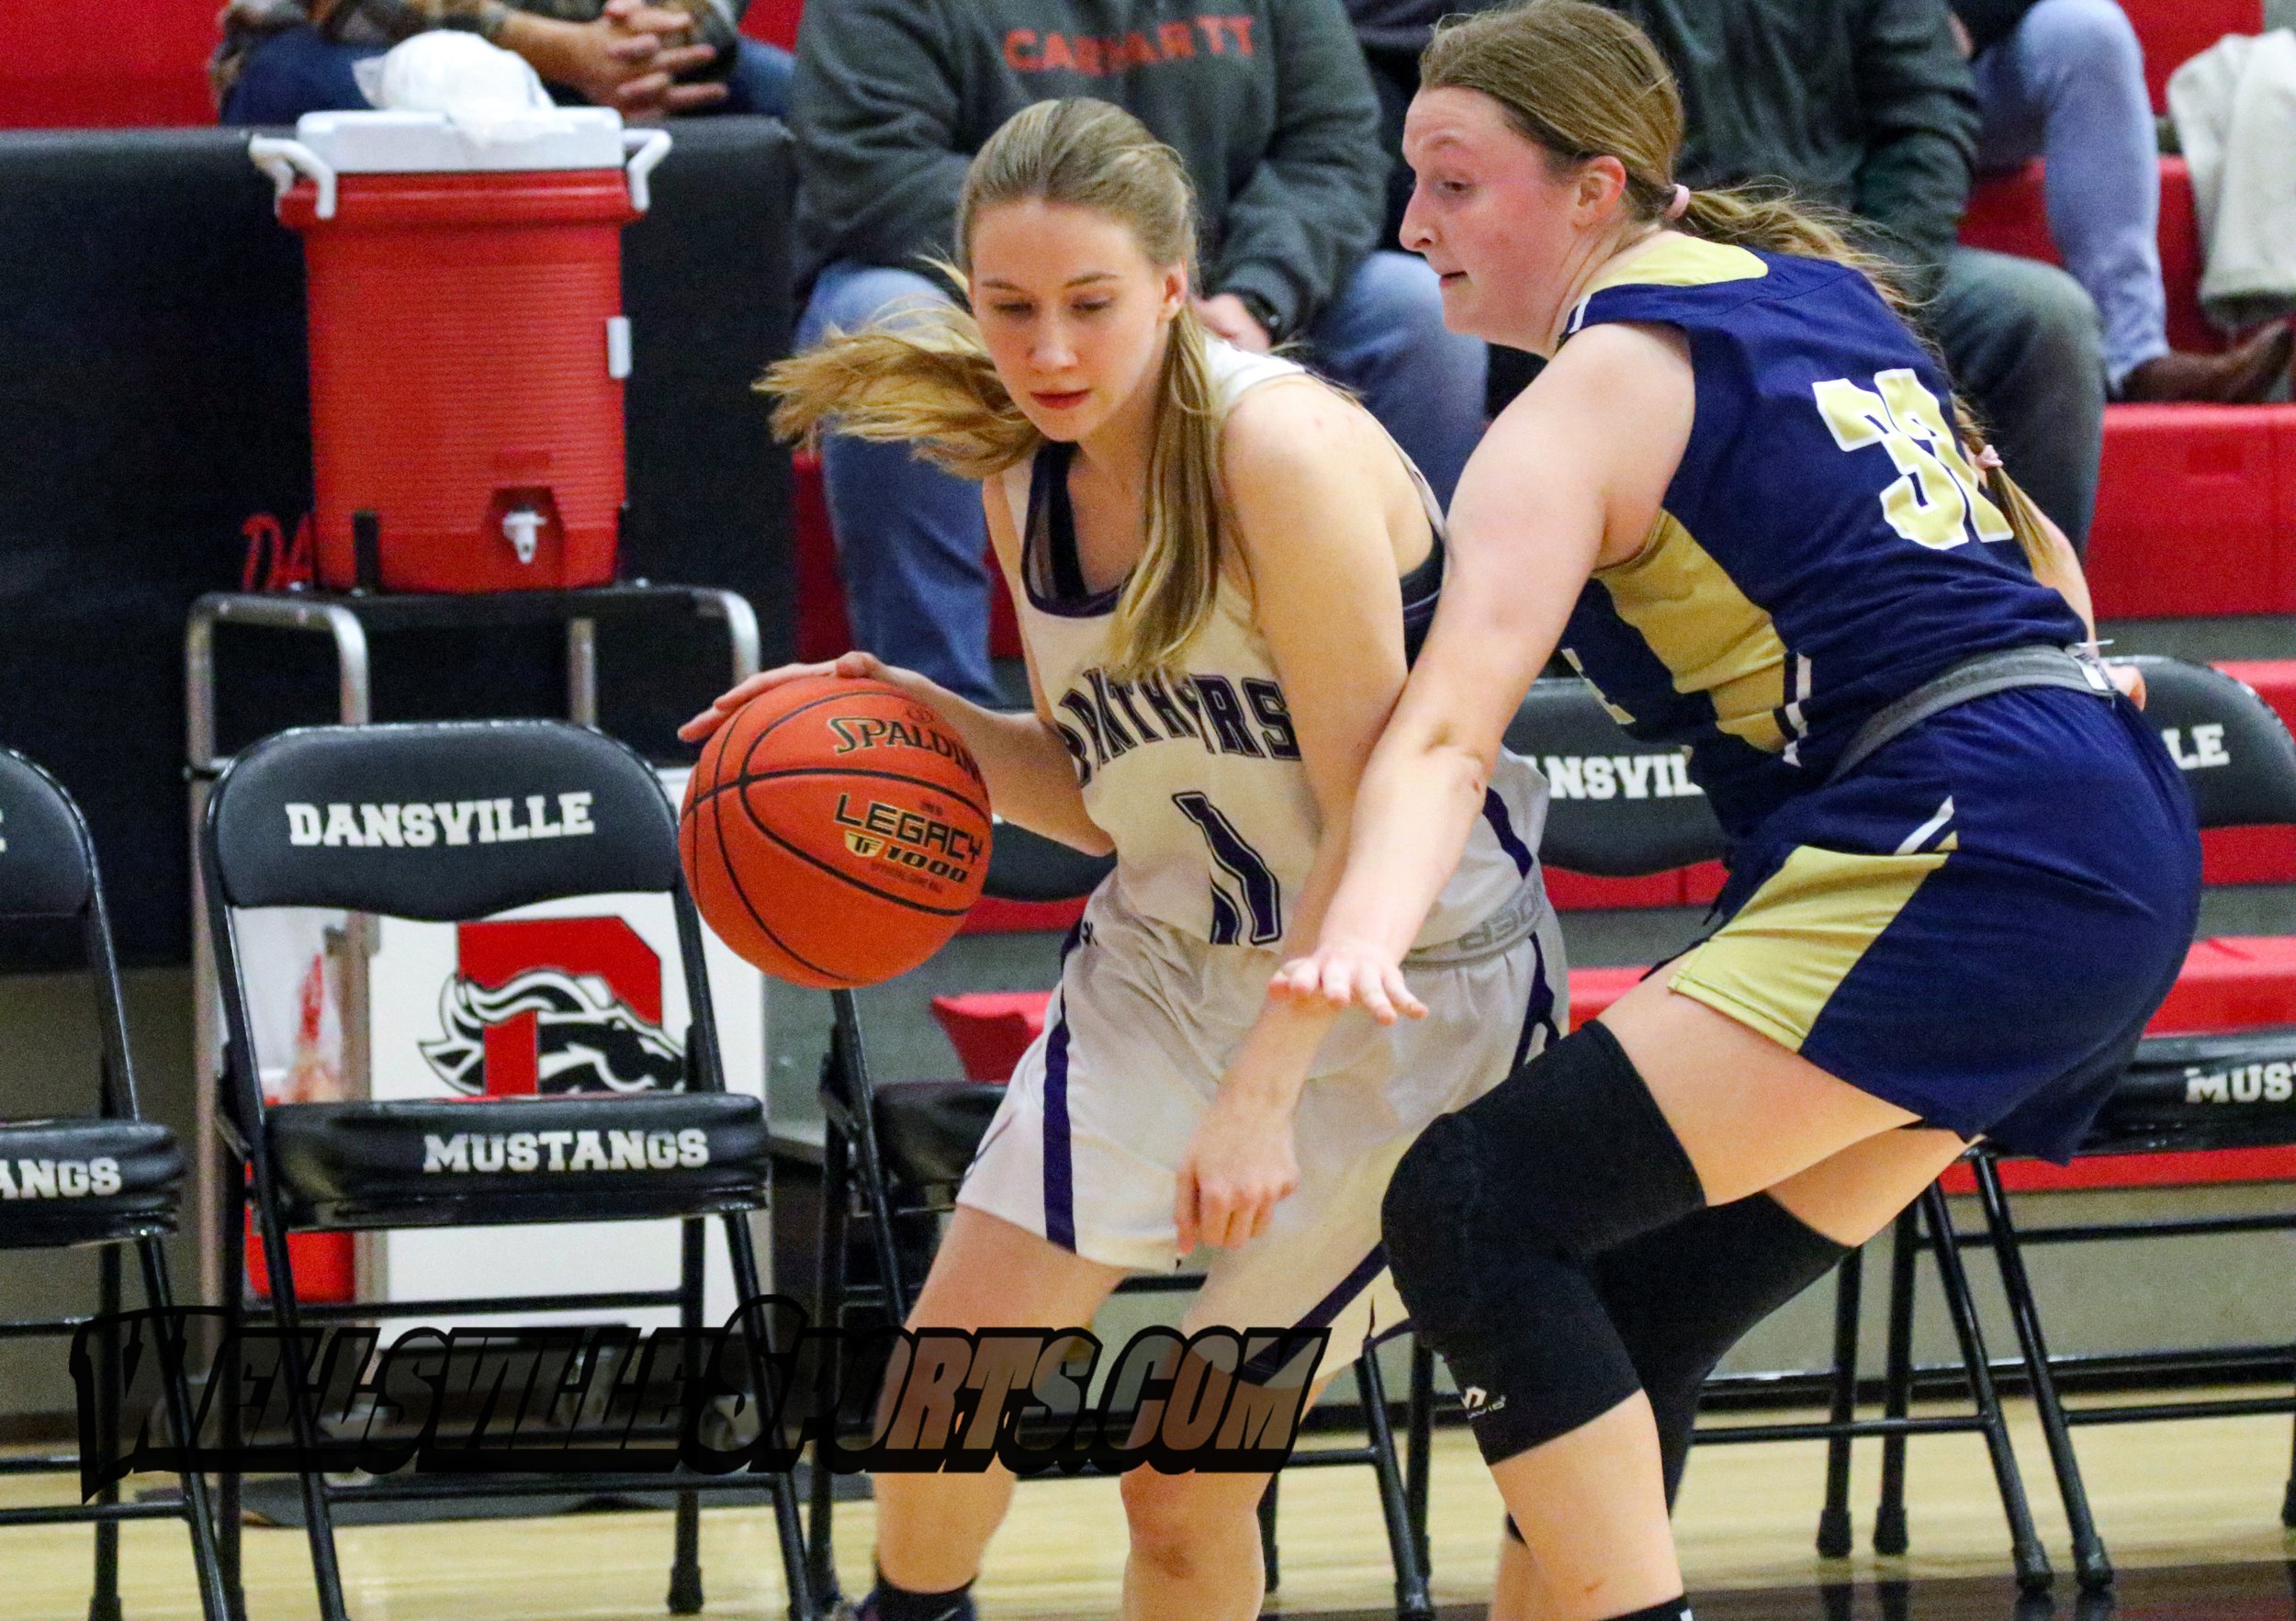  Andover/Whitesville senior Serena Ainsworth (11) looks to provide a drive inside while under pressure from the Notre Dame-Batavia defense during Monday’s Class D State Qualifier in Dansville. [Chris Brooks/WellsvilleSports.com] 